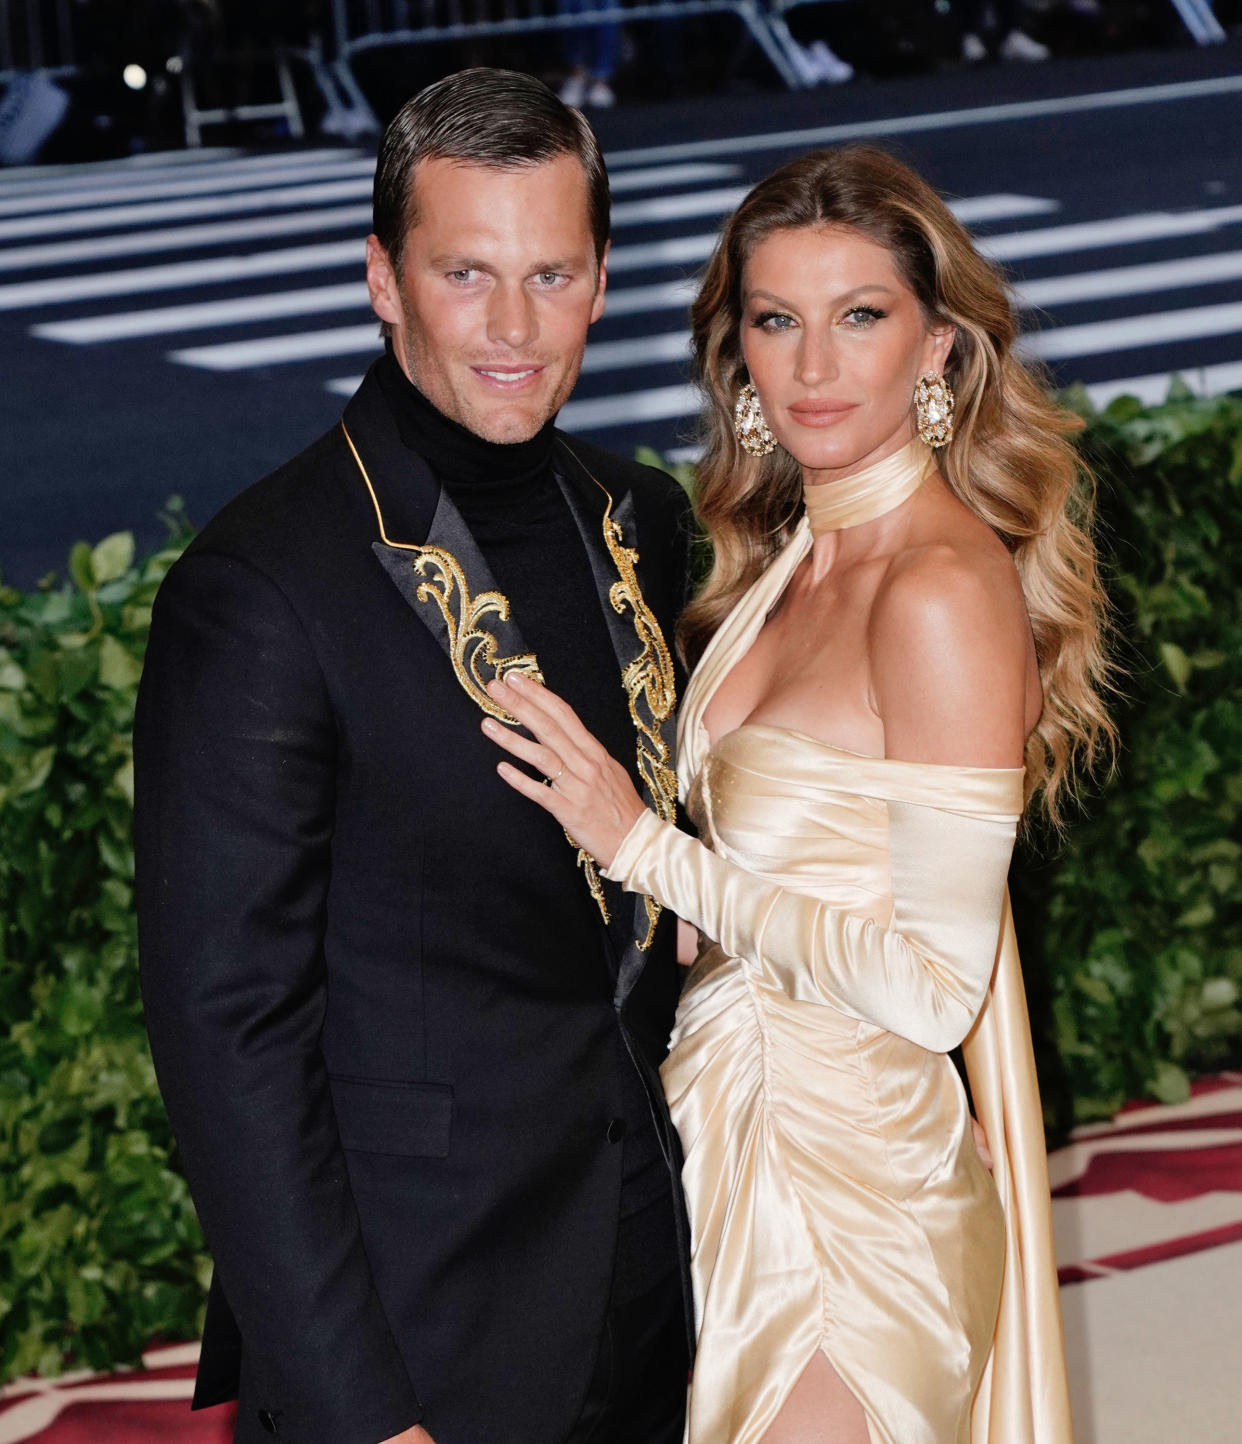 Gisele Bündchen and husband Tom Brady are now well known for their commitment to clean eating. (Photo: Jackson Lee/Getty Images)